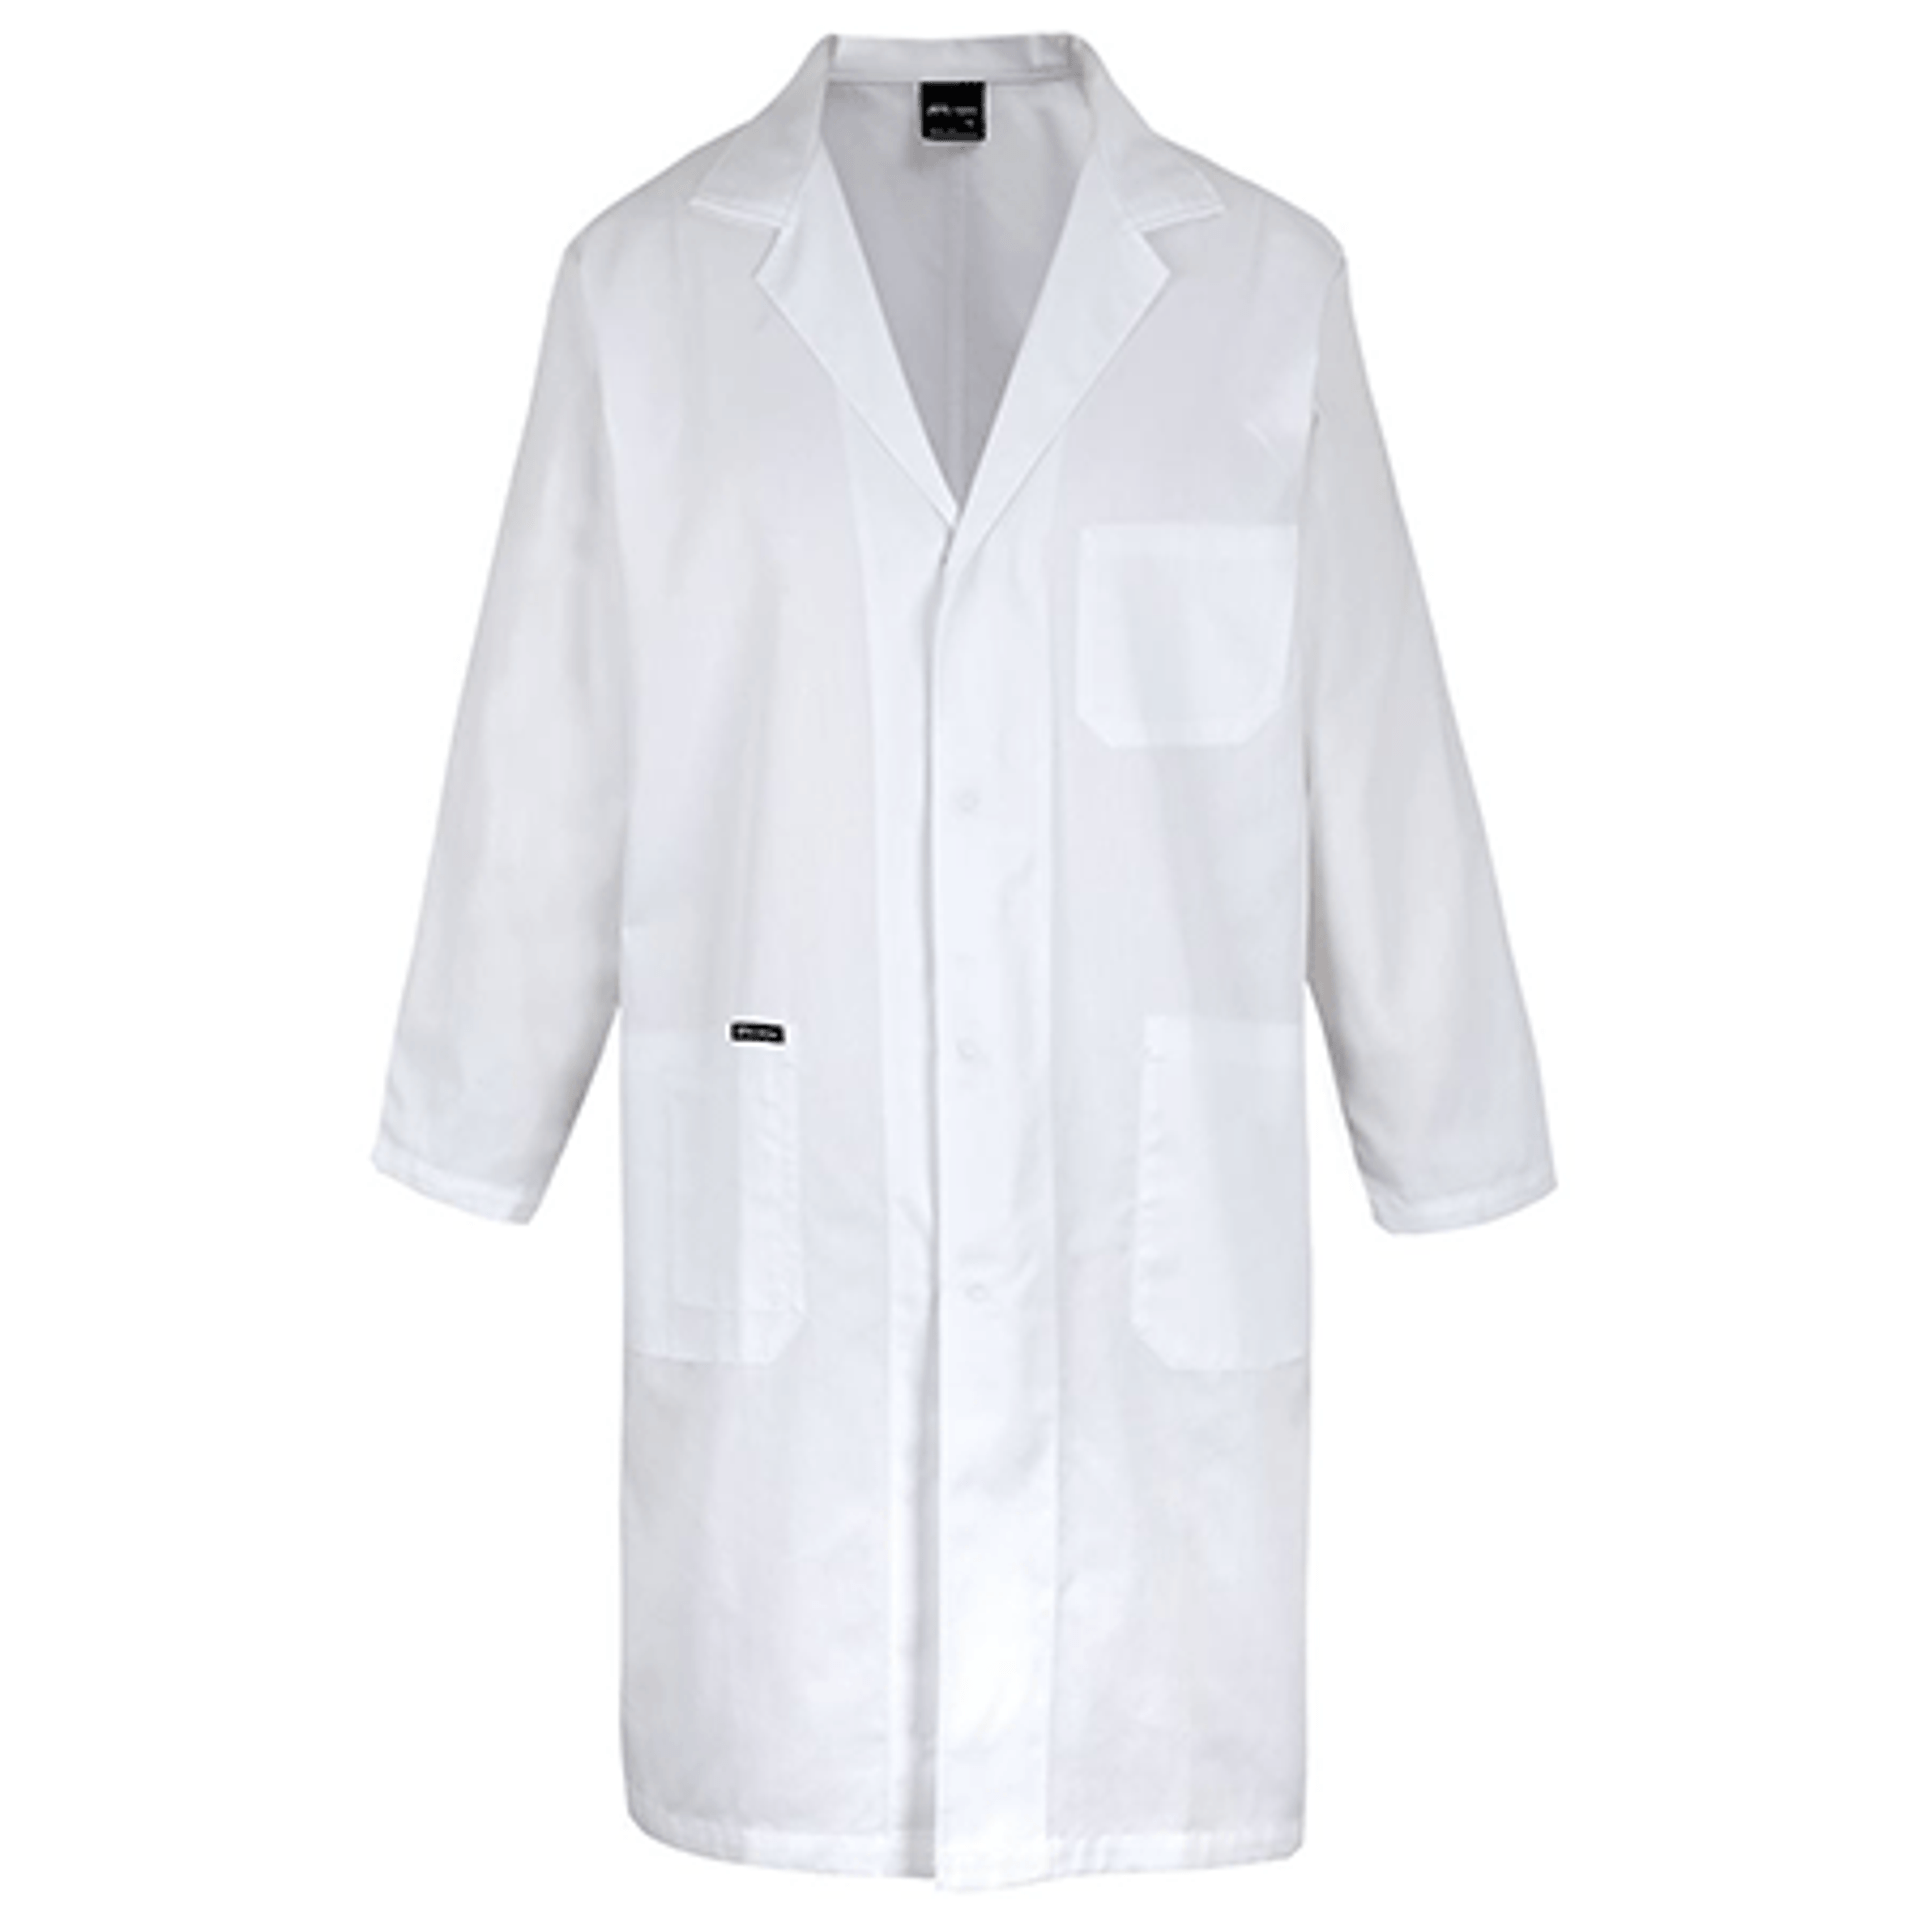 Food Processing Clothing - Online Workwear